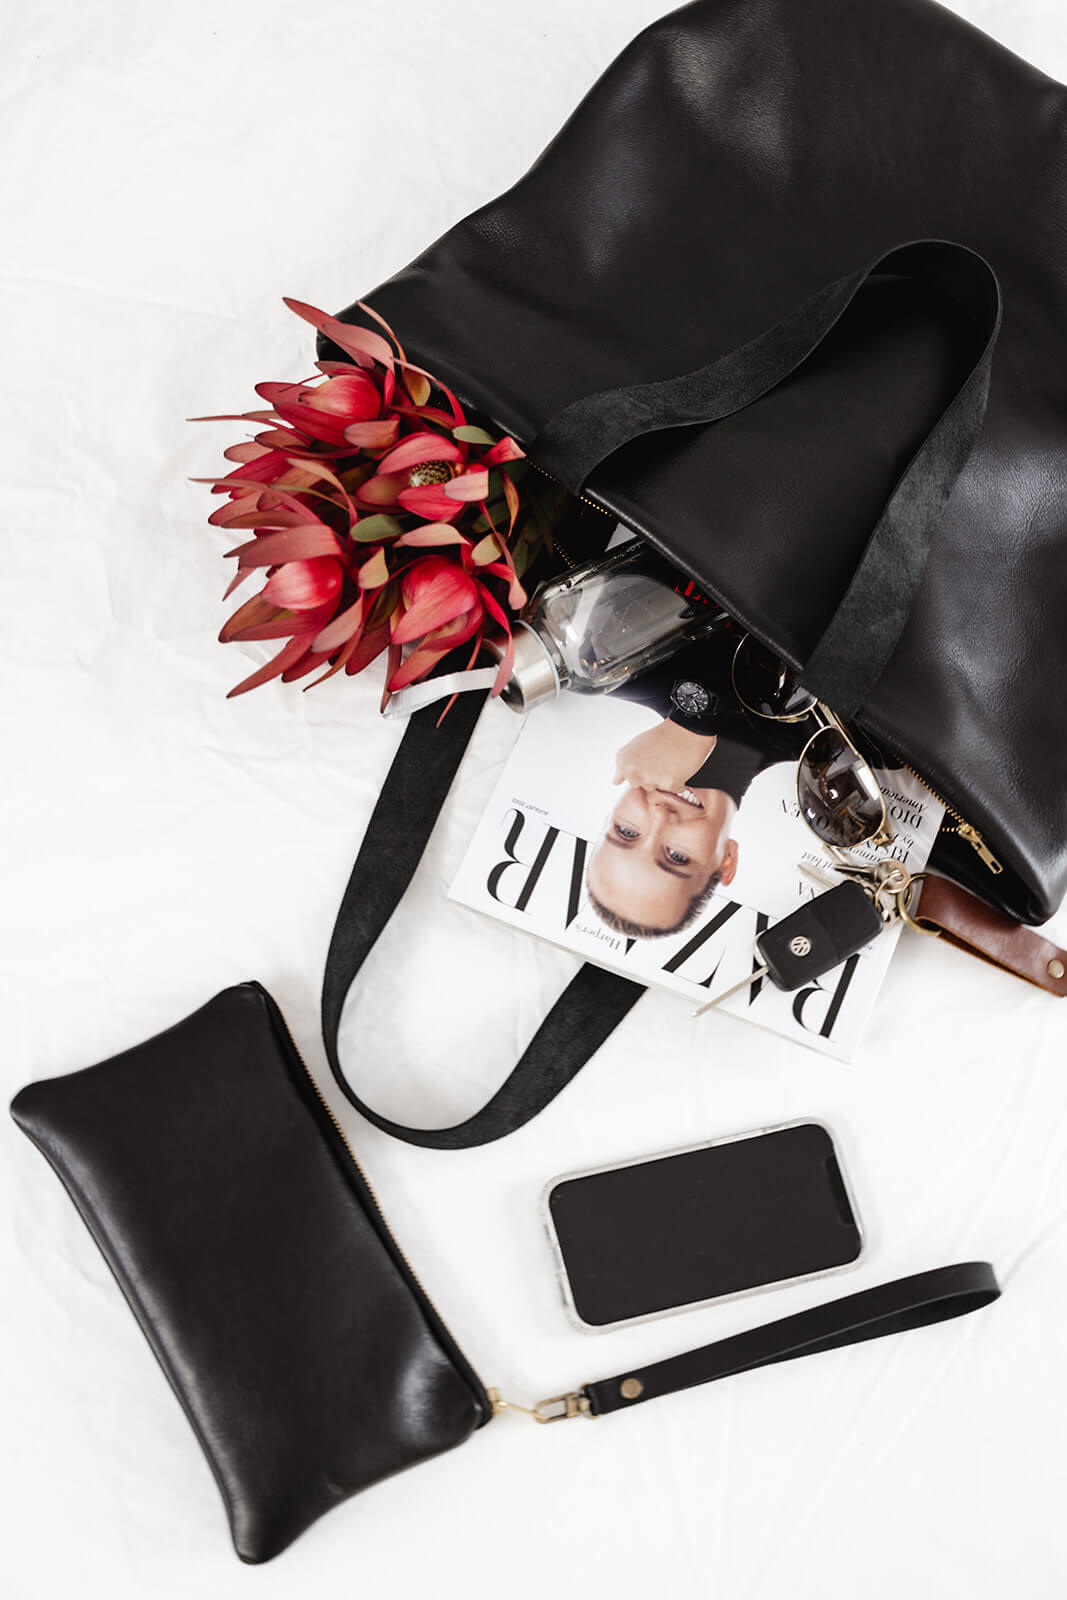 Ella Jackson Leather Backpack & Tote in Black lying on a white sheet and showing what fits in it...magazine, flowers, water bottle, glasses, keys, phone and Ella Jackson Leather Card Clutch in black